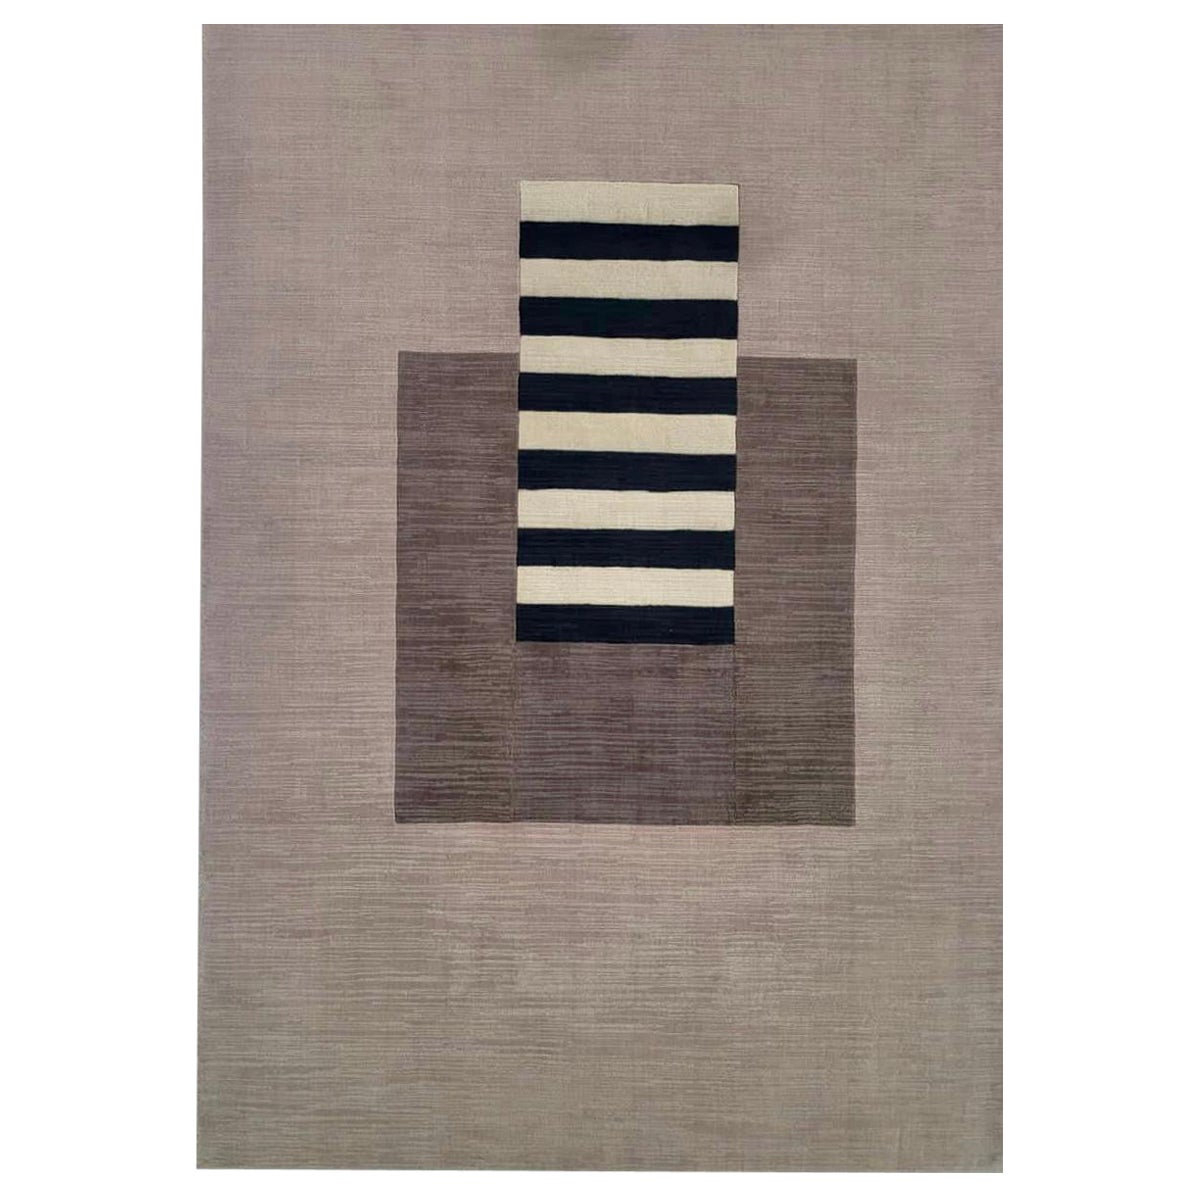  Brown, rug, handwoven, white black stripes, beige background 100pct wool carpet For Sale